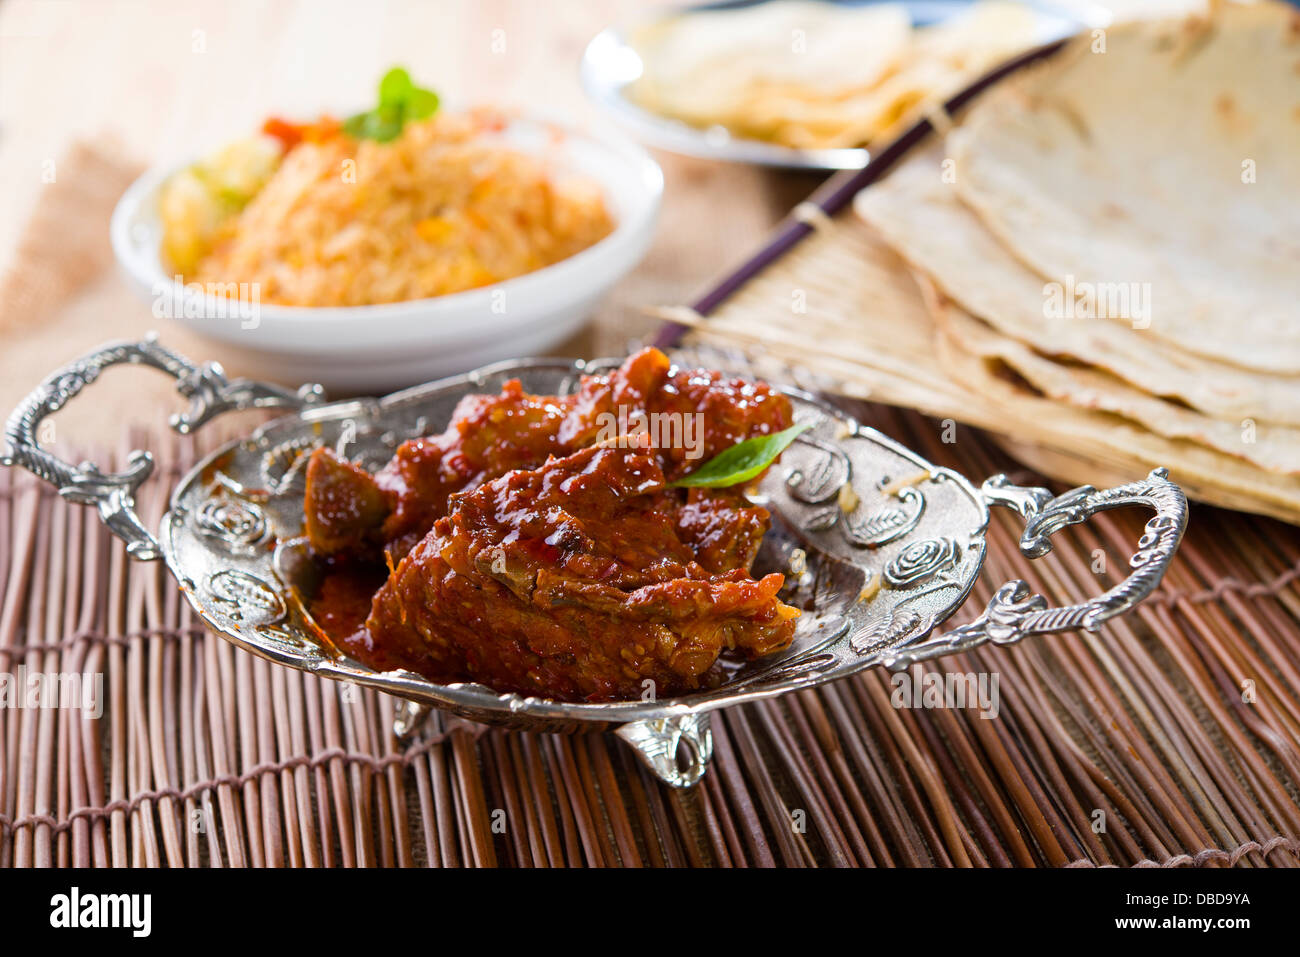 Butter chicken curry with basmati rice and various indian foods at background Stock Photo